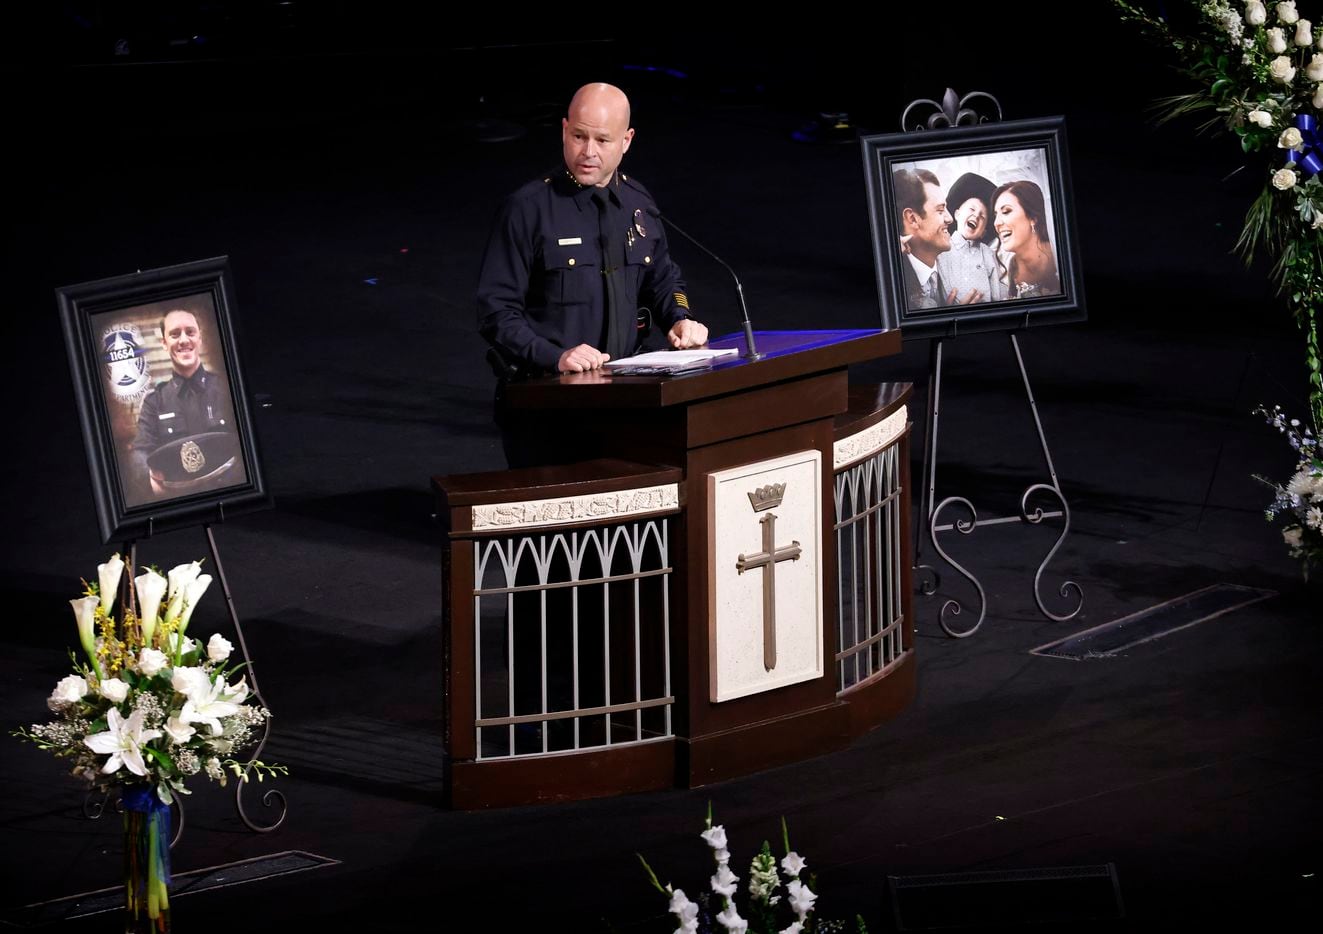 Dallas Police Chief Eddie Garcia addresses the congregation during the funeral service for Dallas Police officer Mitchell Penton at Prestonwood Baptist Church in Plano, Monday, February 22, 2021. Penton was killed Saturday, Feb. 13, 2021, in a crash involving a drunk driving suspect. (Tom Fox/The Dallas Morning News)